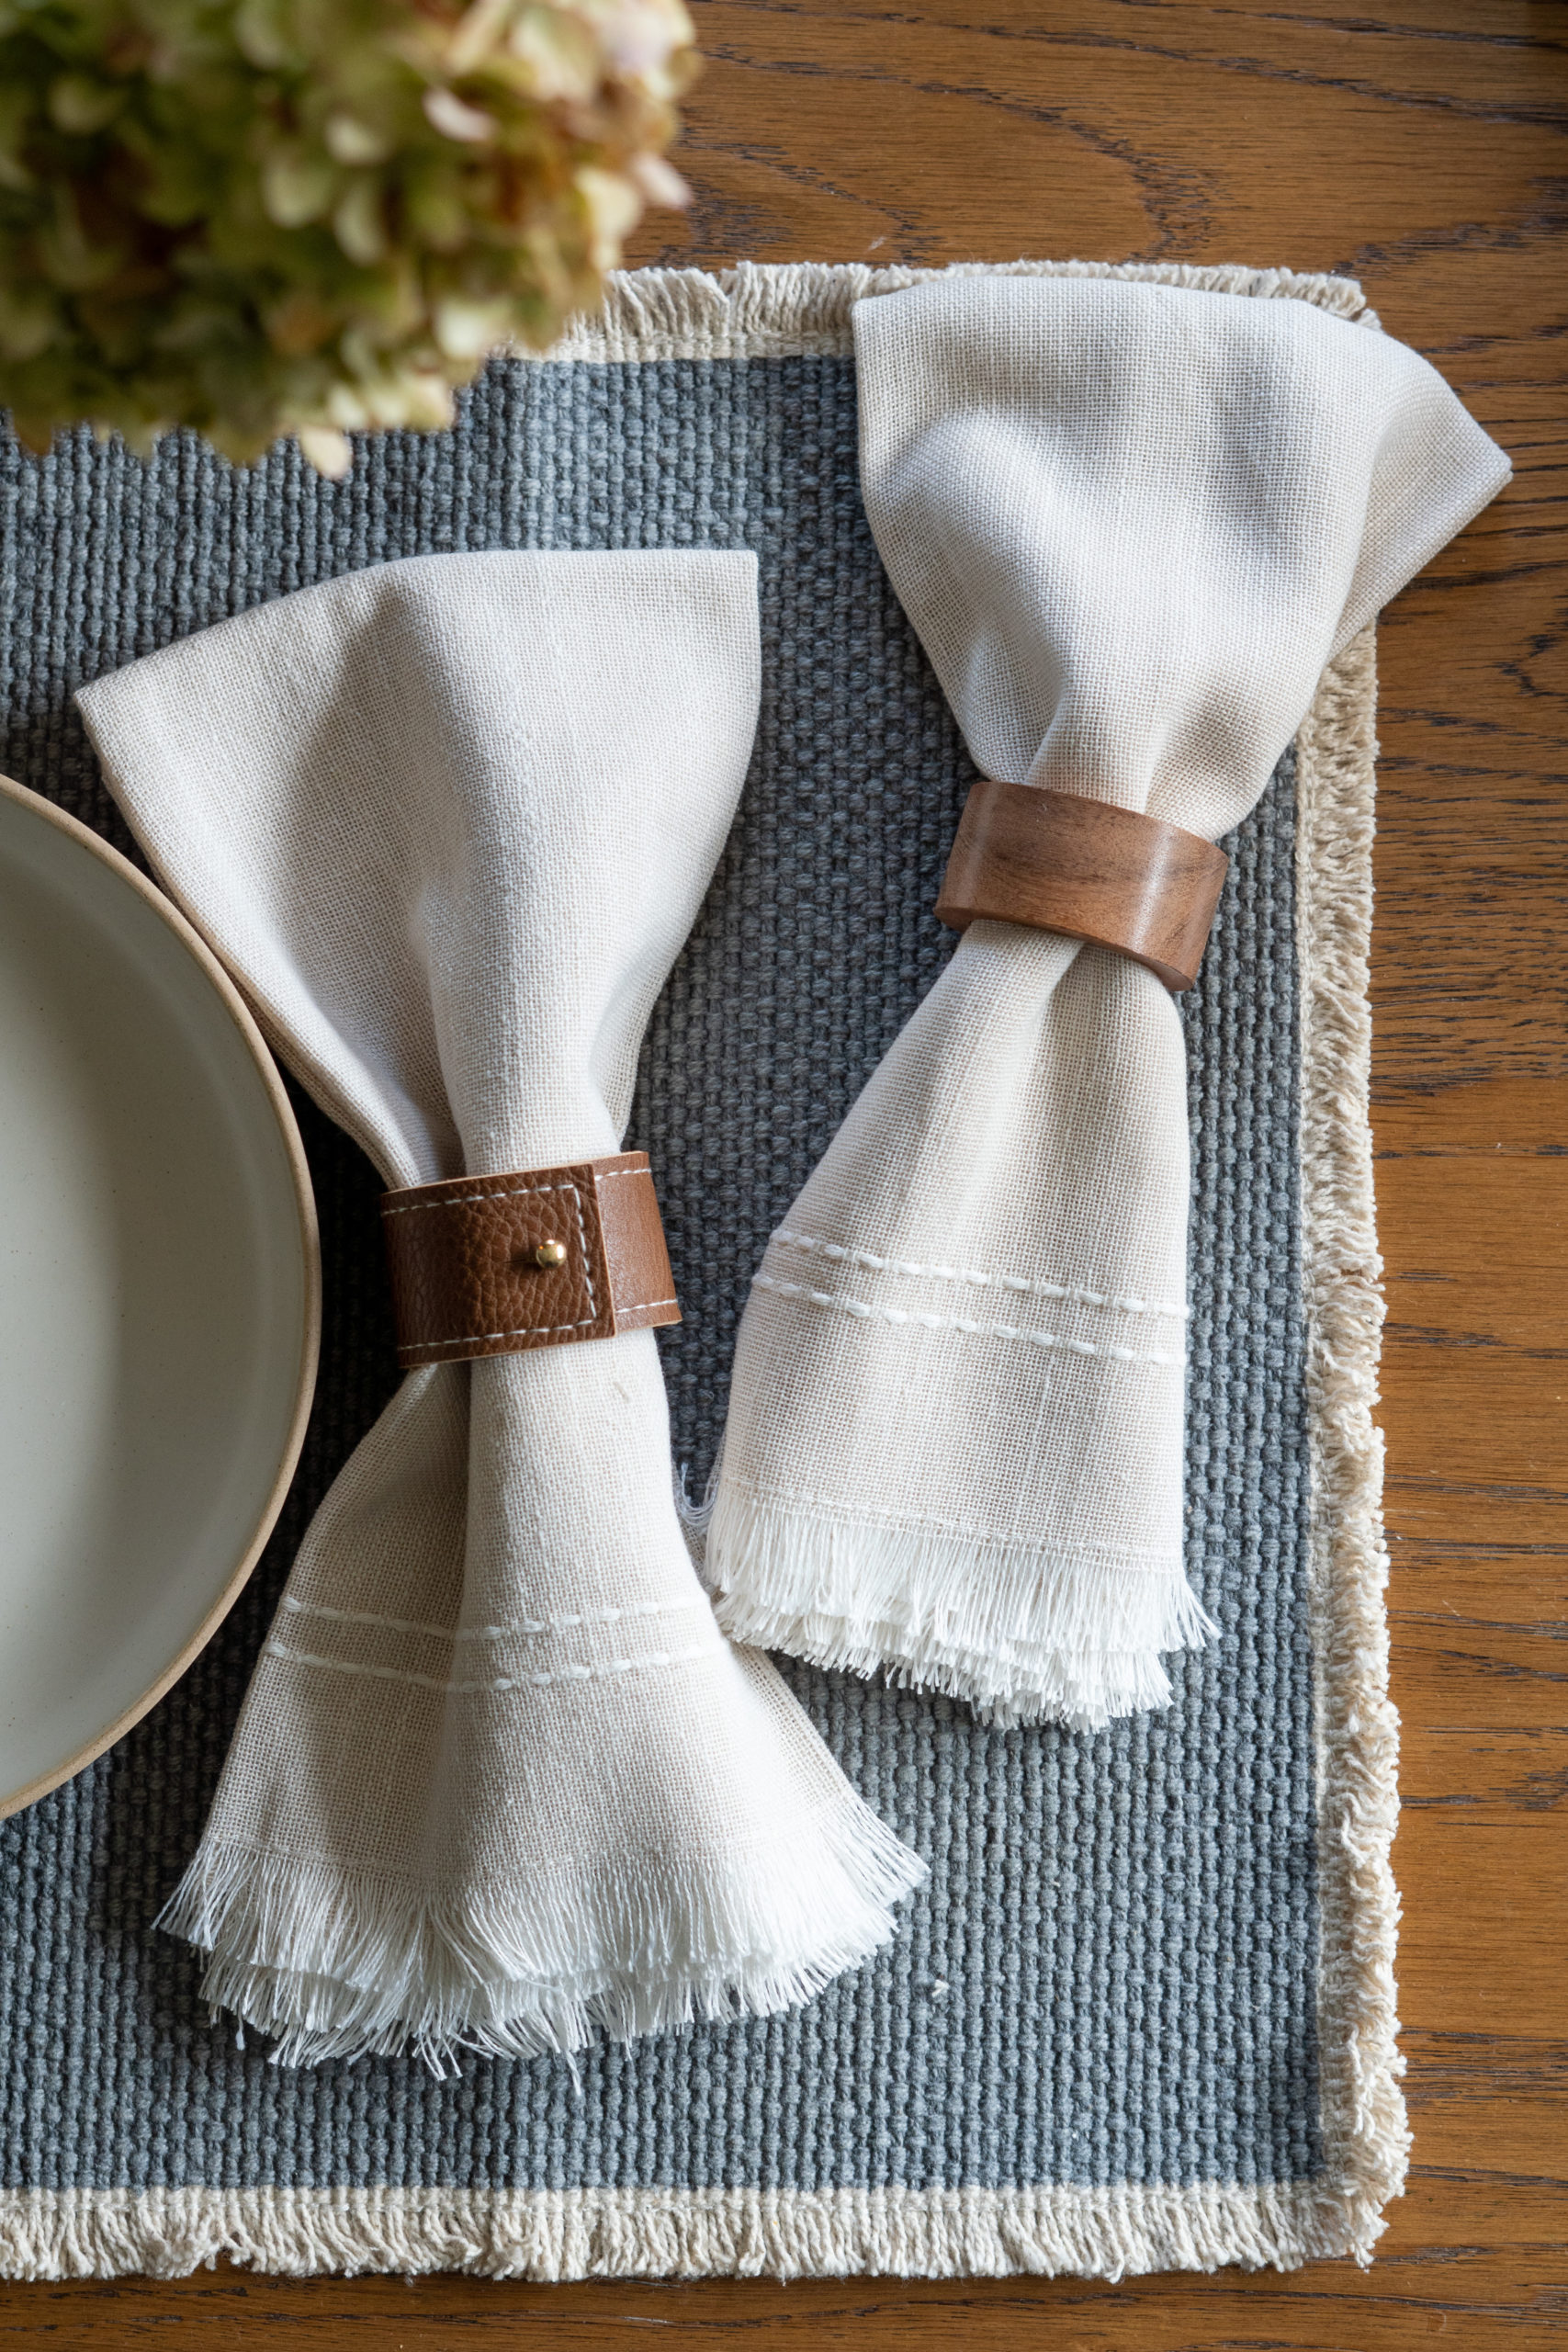 napkin rings with fringe napkin from Walmart. Fall Home Decor styled by Mrsjessicadarling